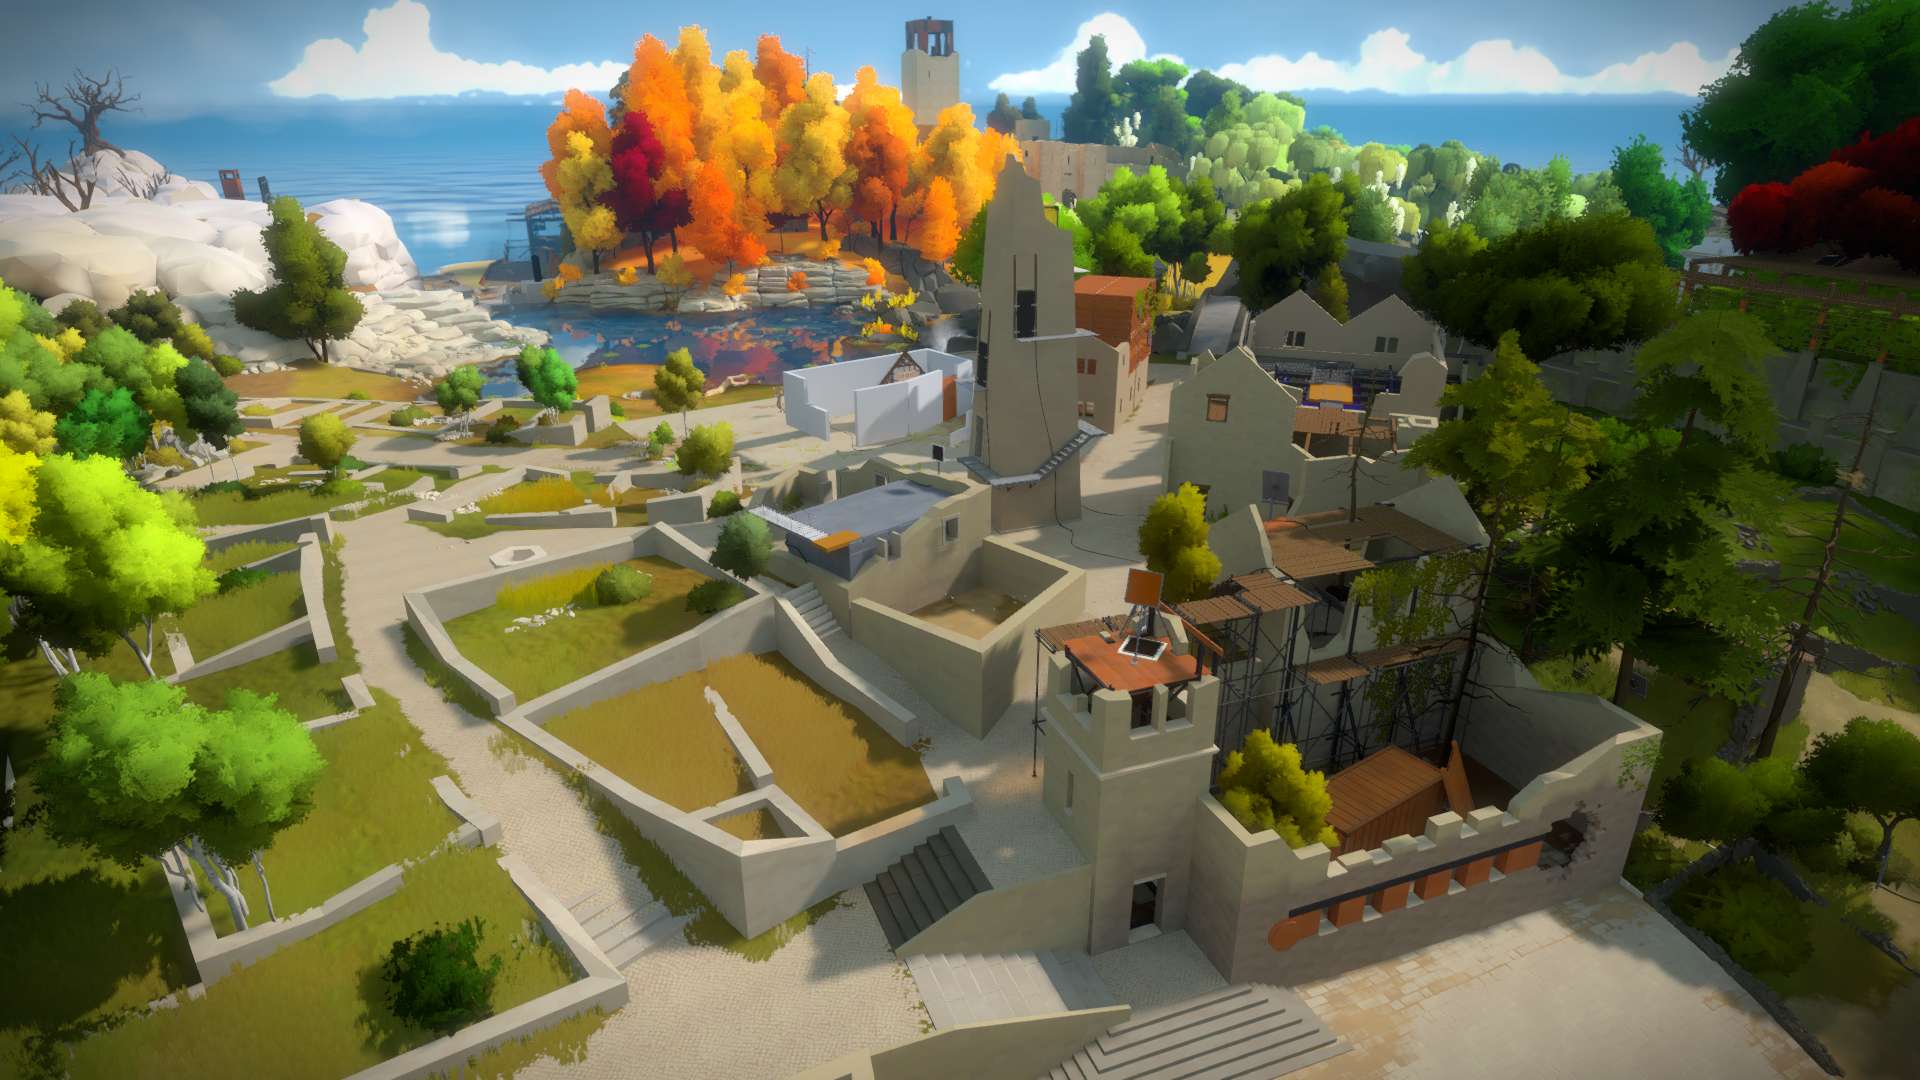 Epic Games Store Offers The Witness Puzzle Game For Free Until April 18th